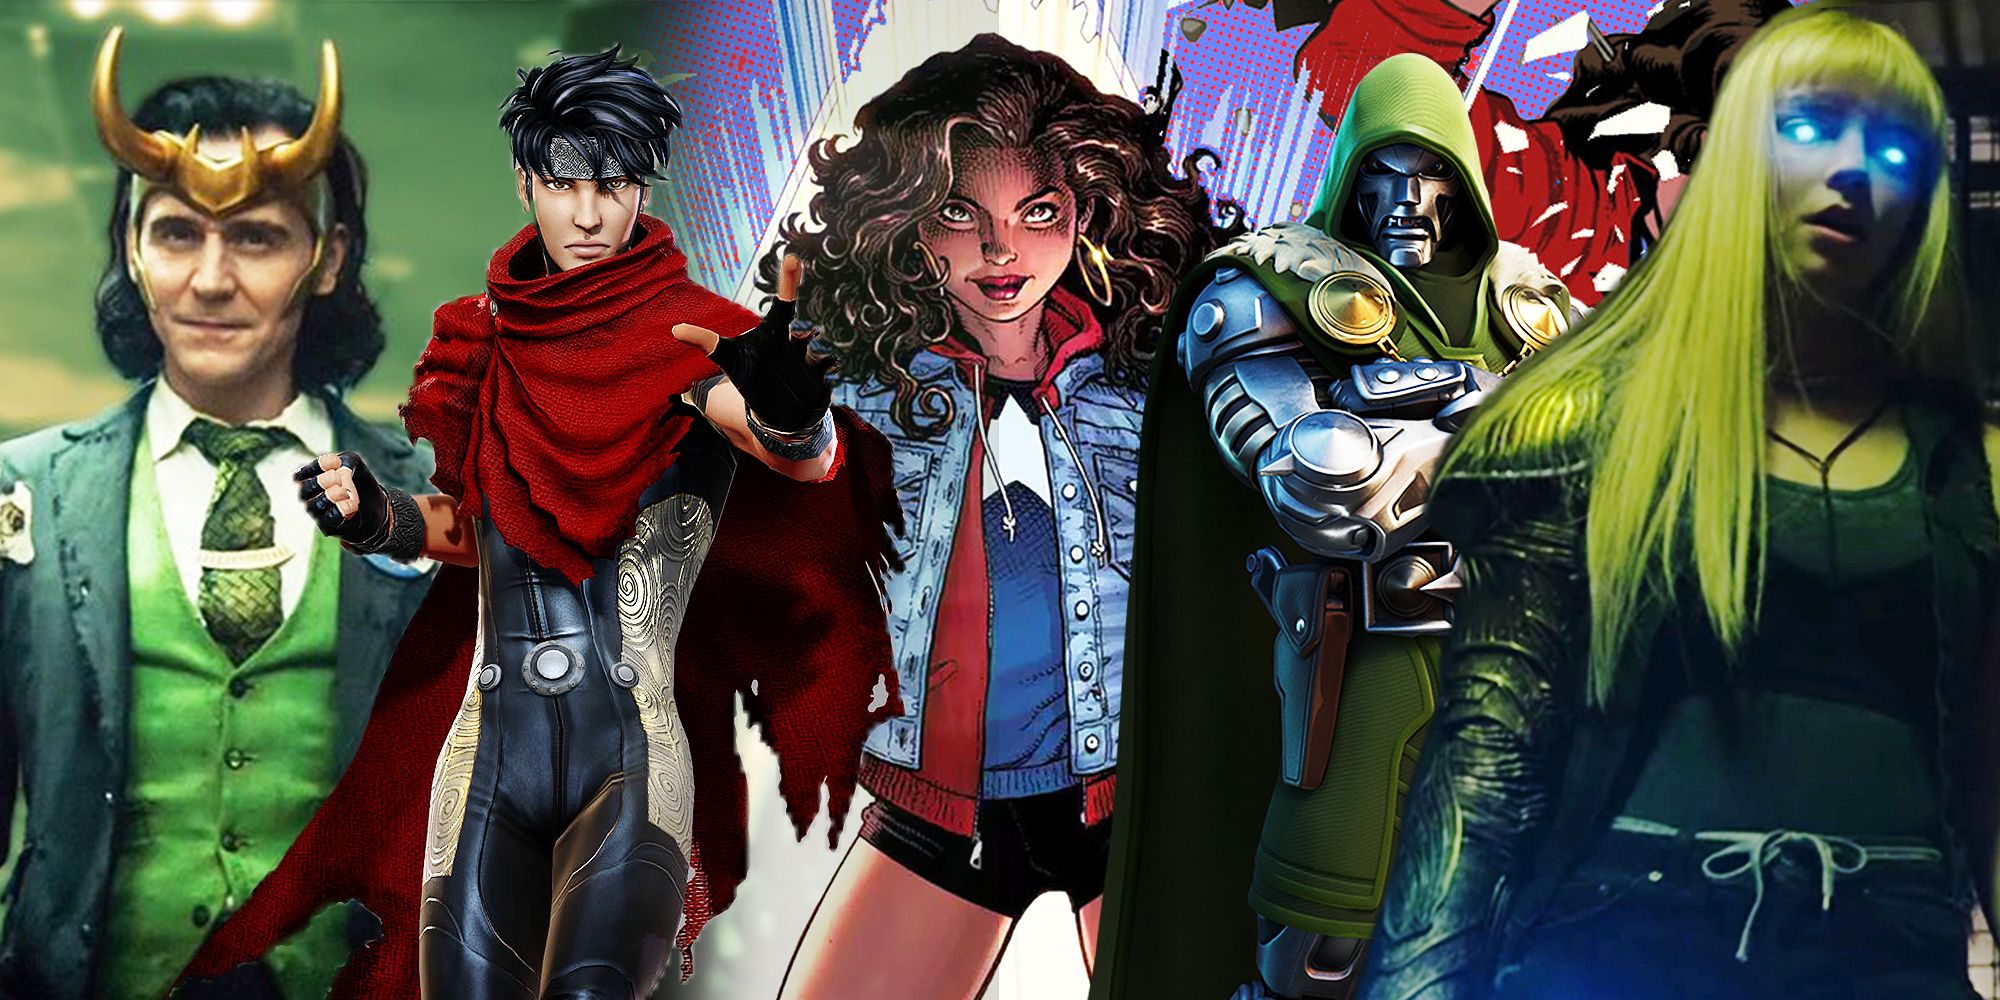 Magic Users in Marvel Comics and the MCU